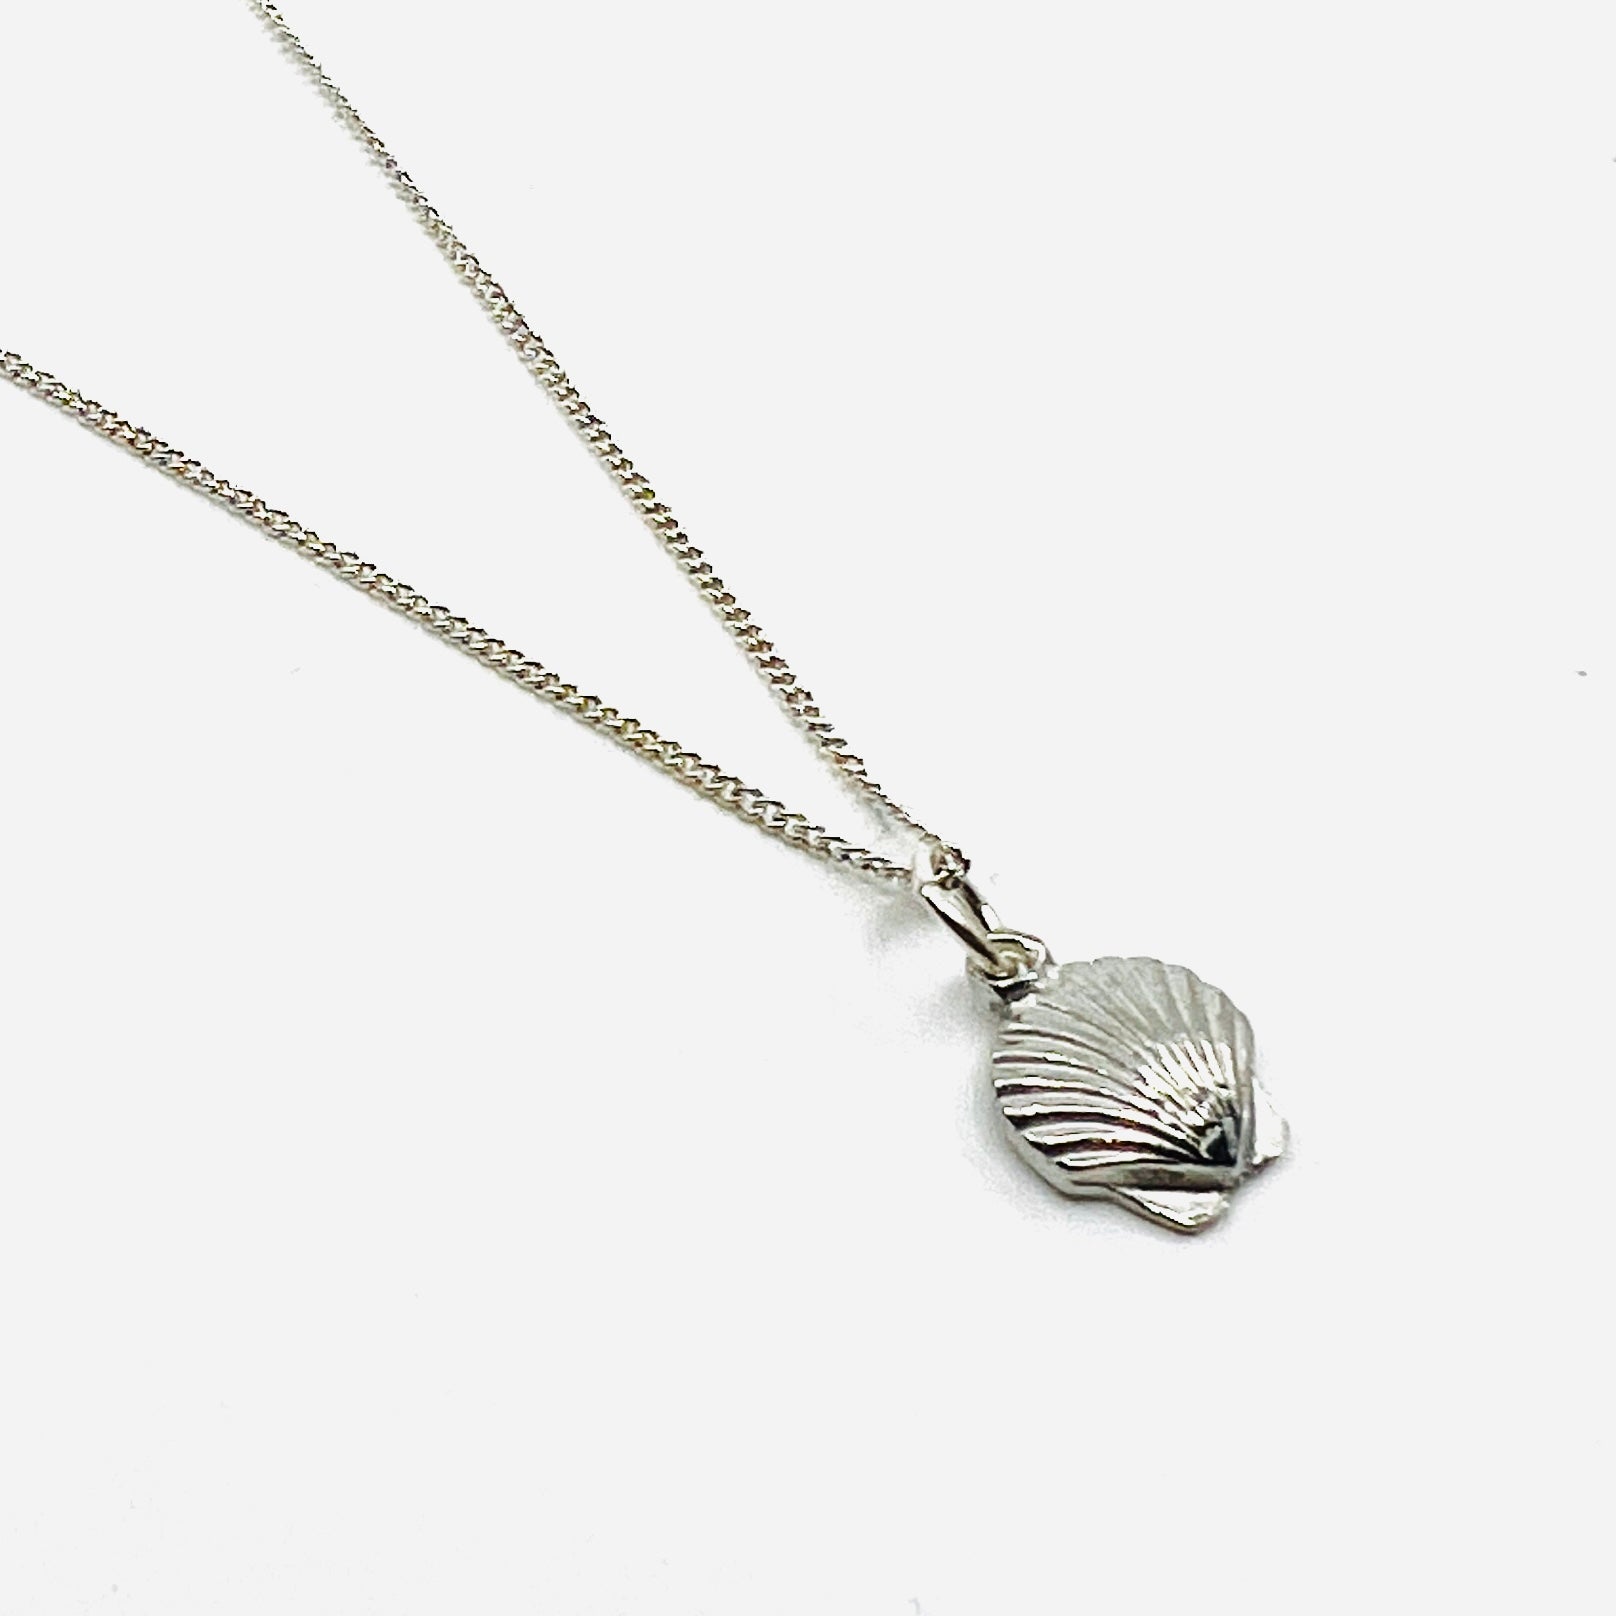 Pewter Scallop Shell Pendant Necklace Jewelry Basic Spirit 